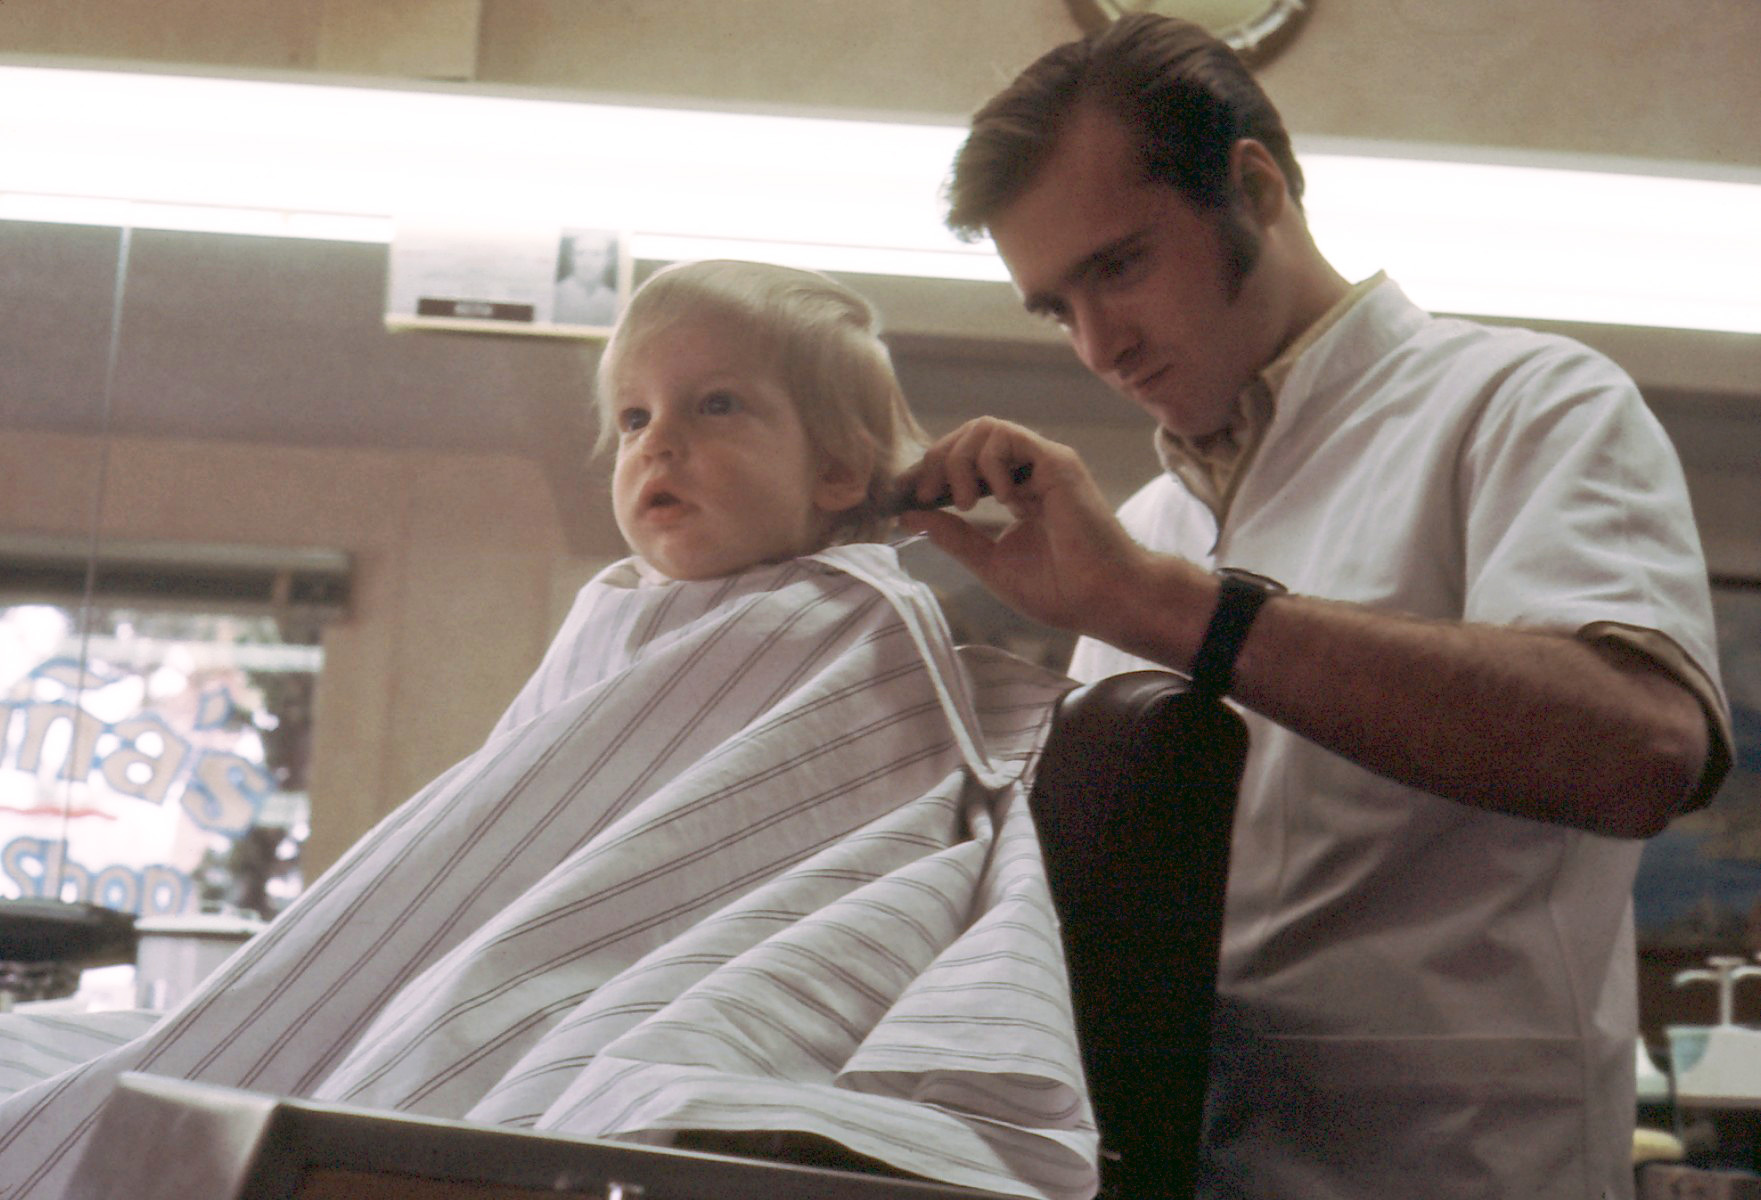 My friend Doug's first haircut, March 1969. View full size.